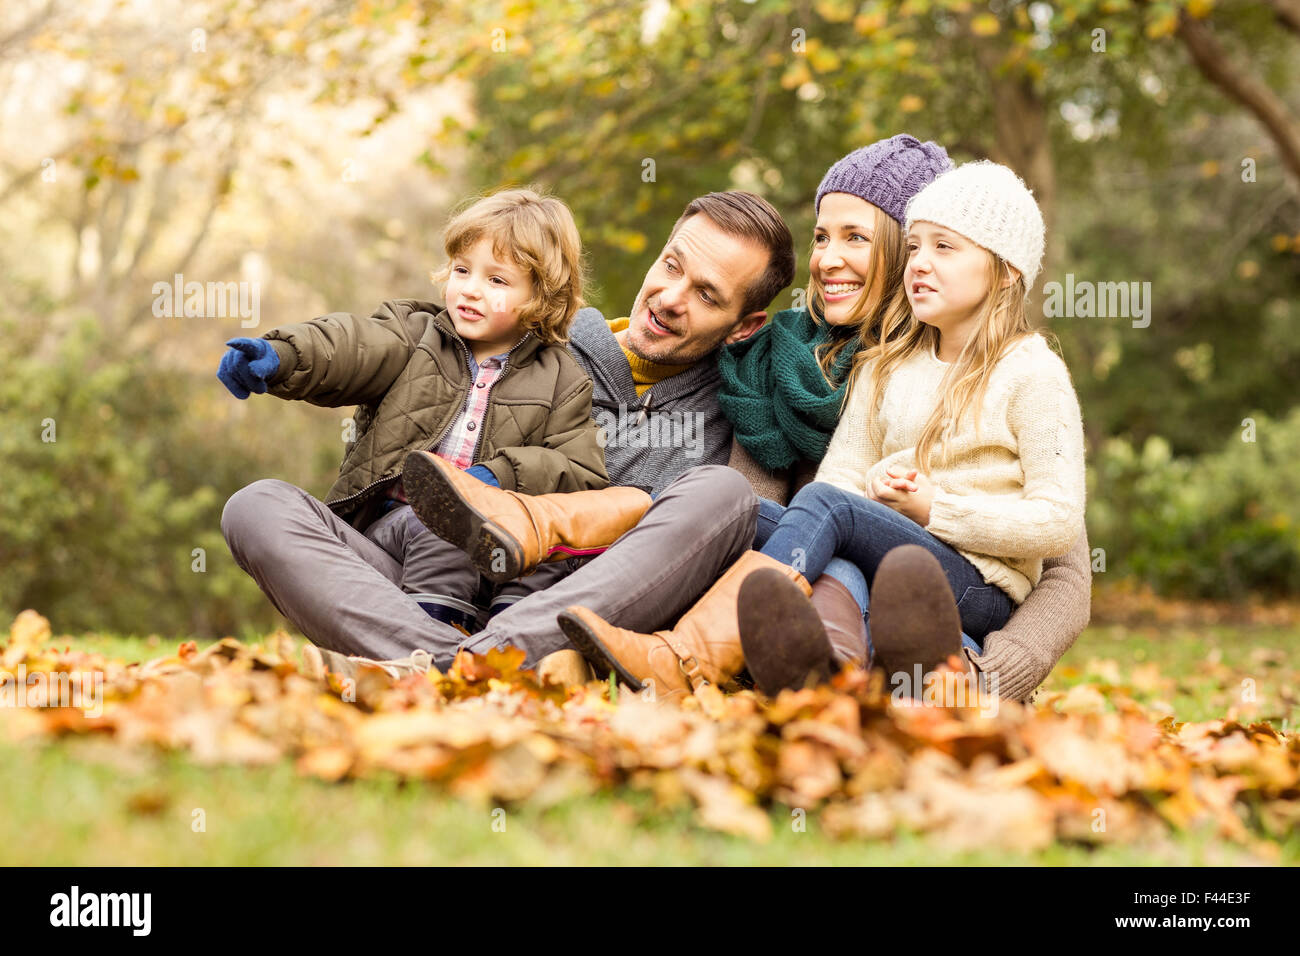 Smiling young family sitting in leaves Stock Photo